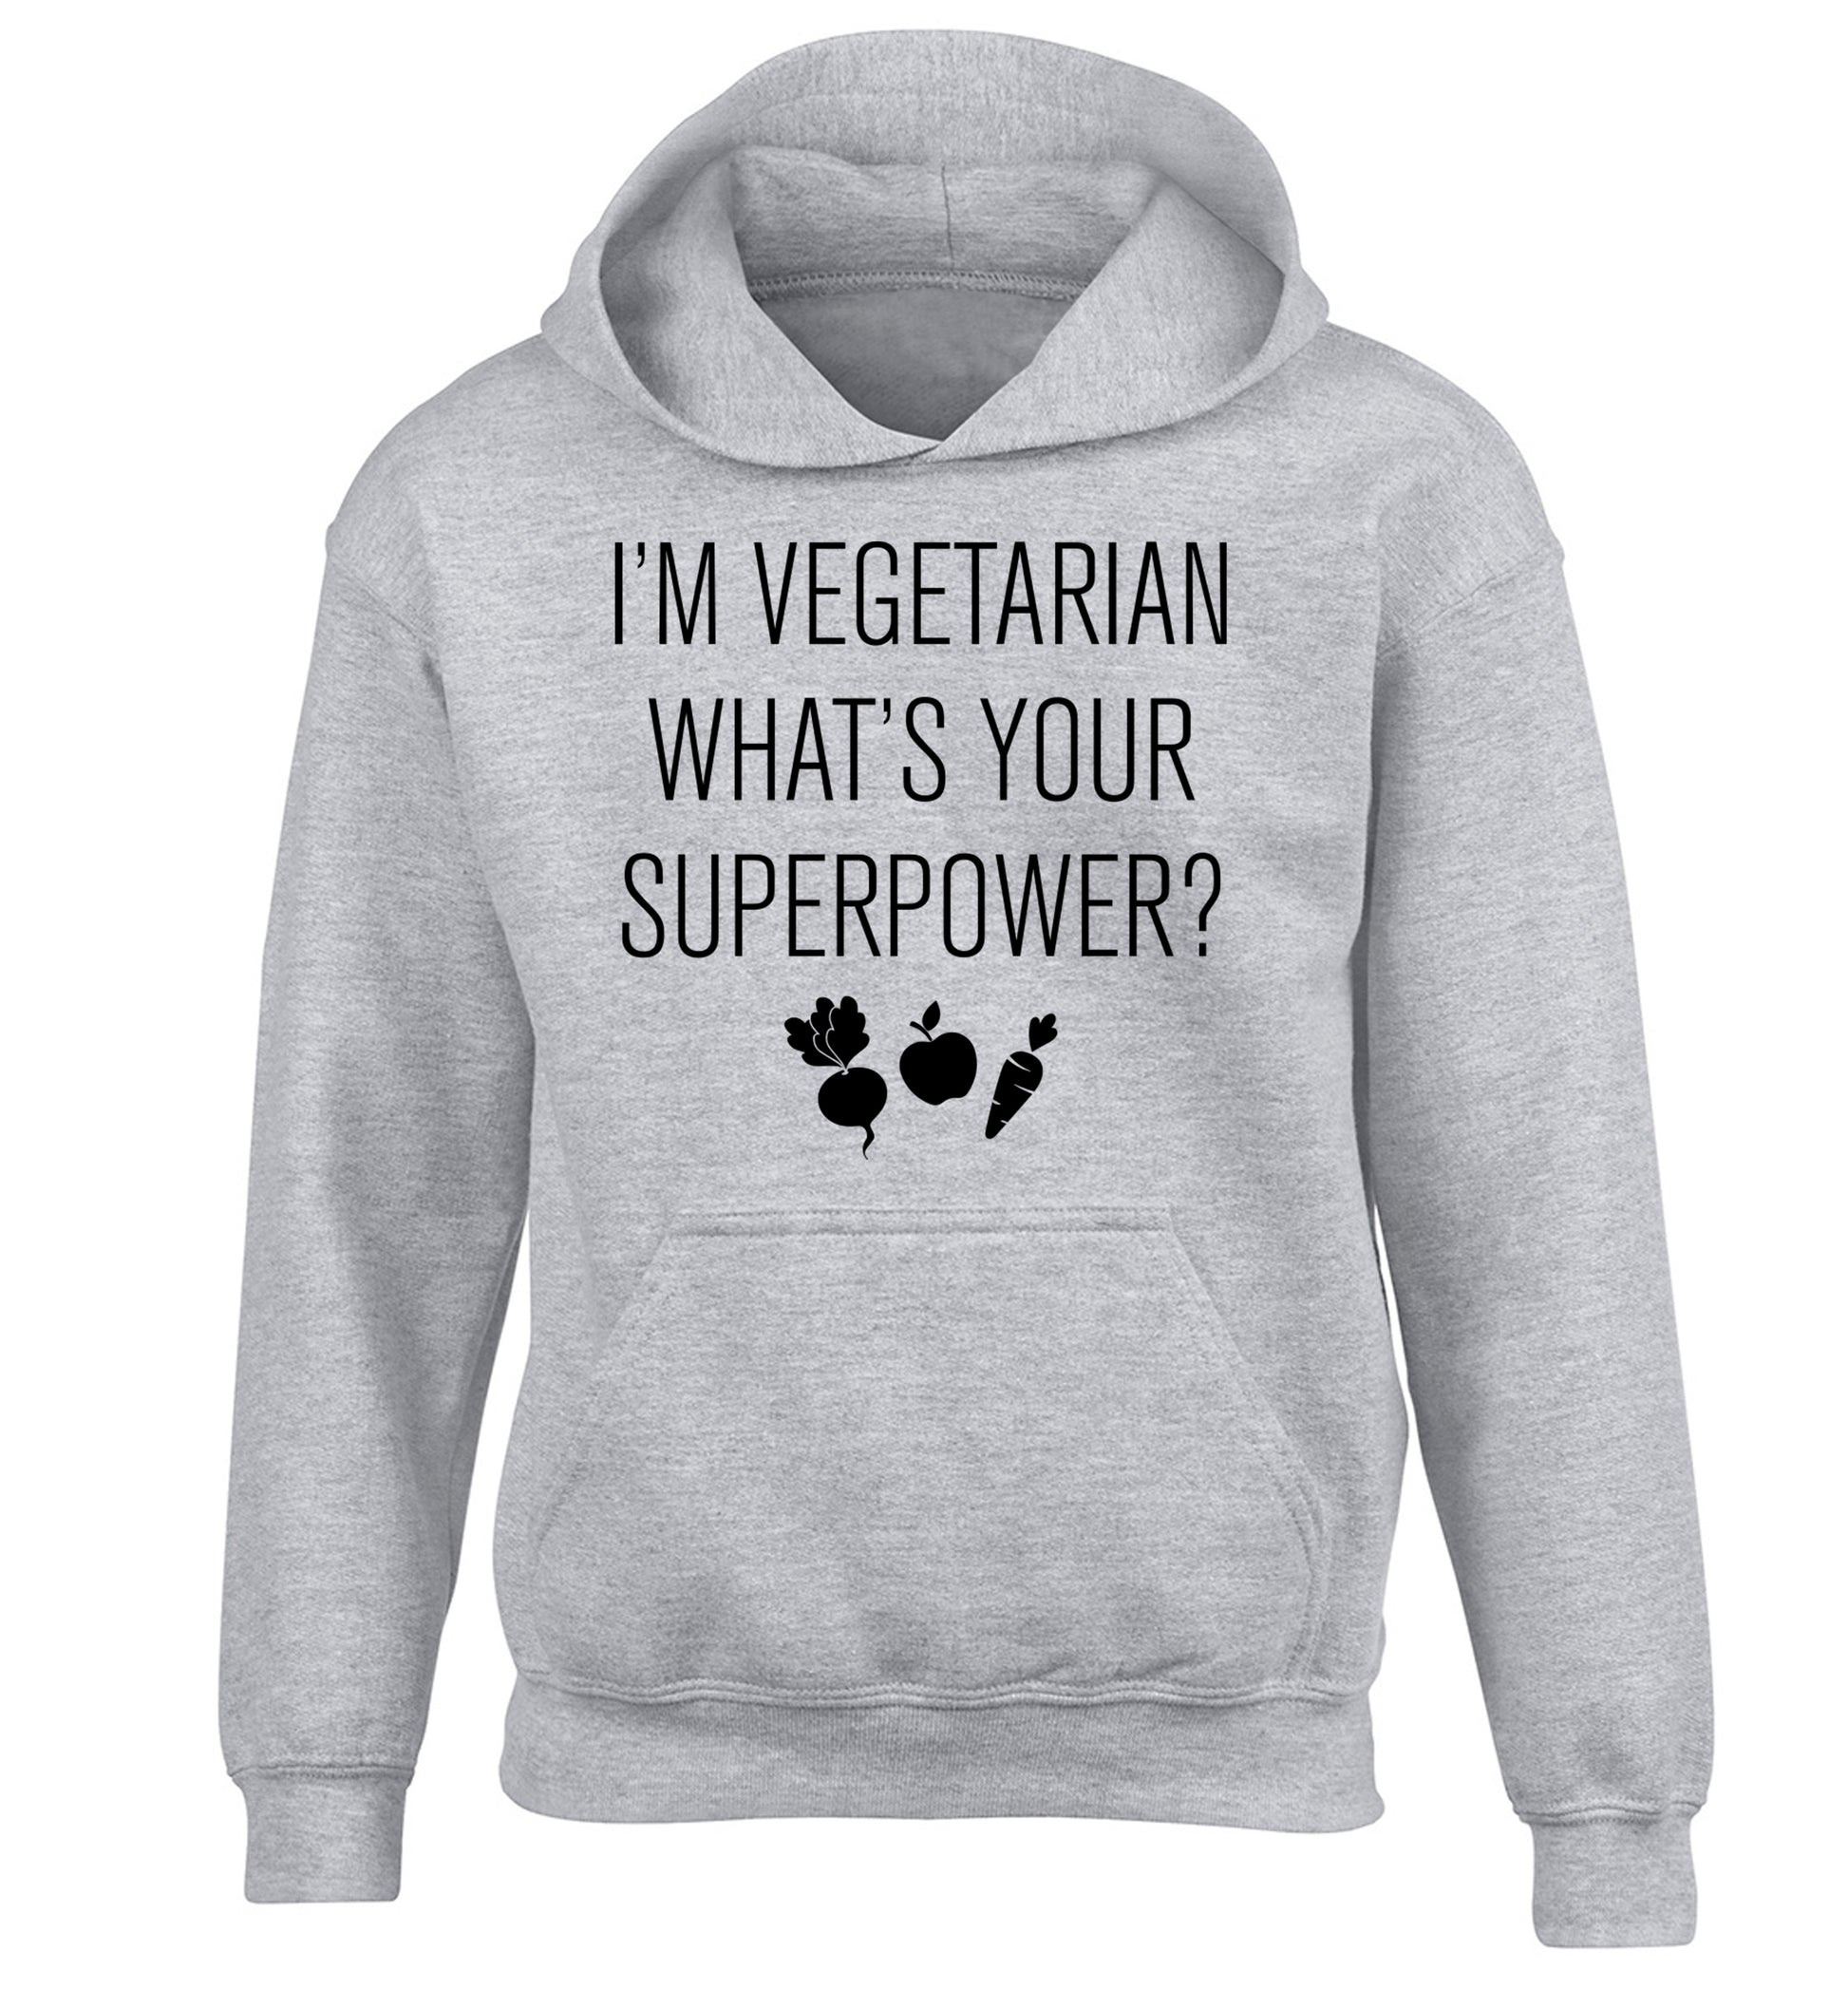 I'm vegetarian what's your superpower? children's grey hoodie 12-13 Years